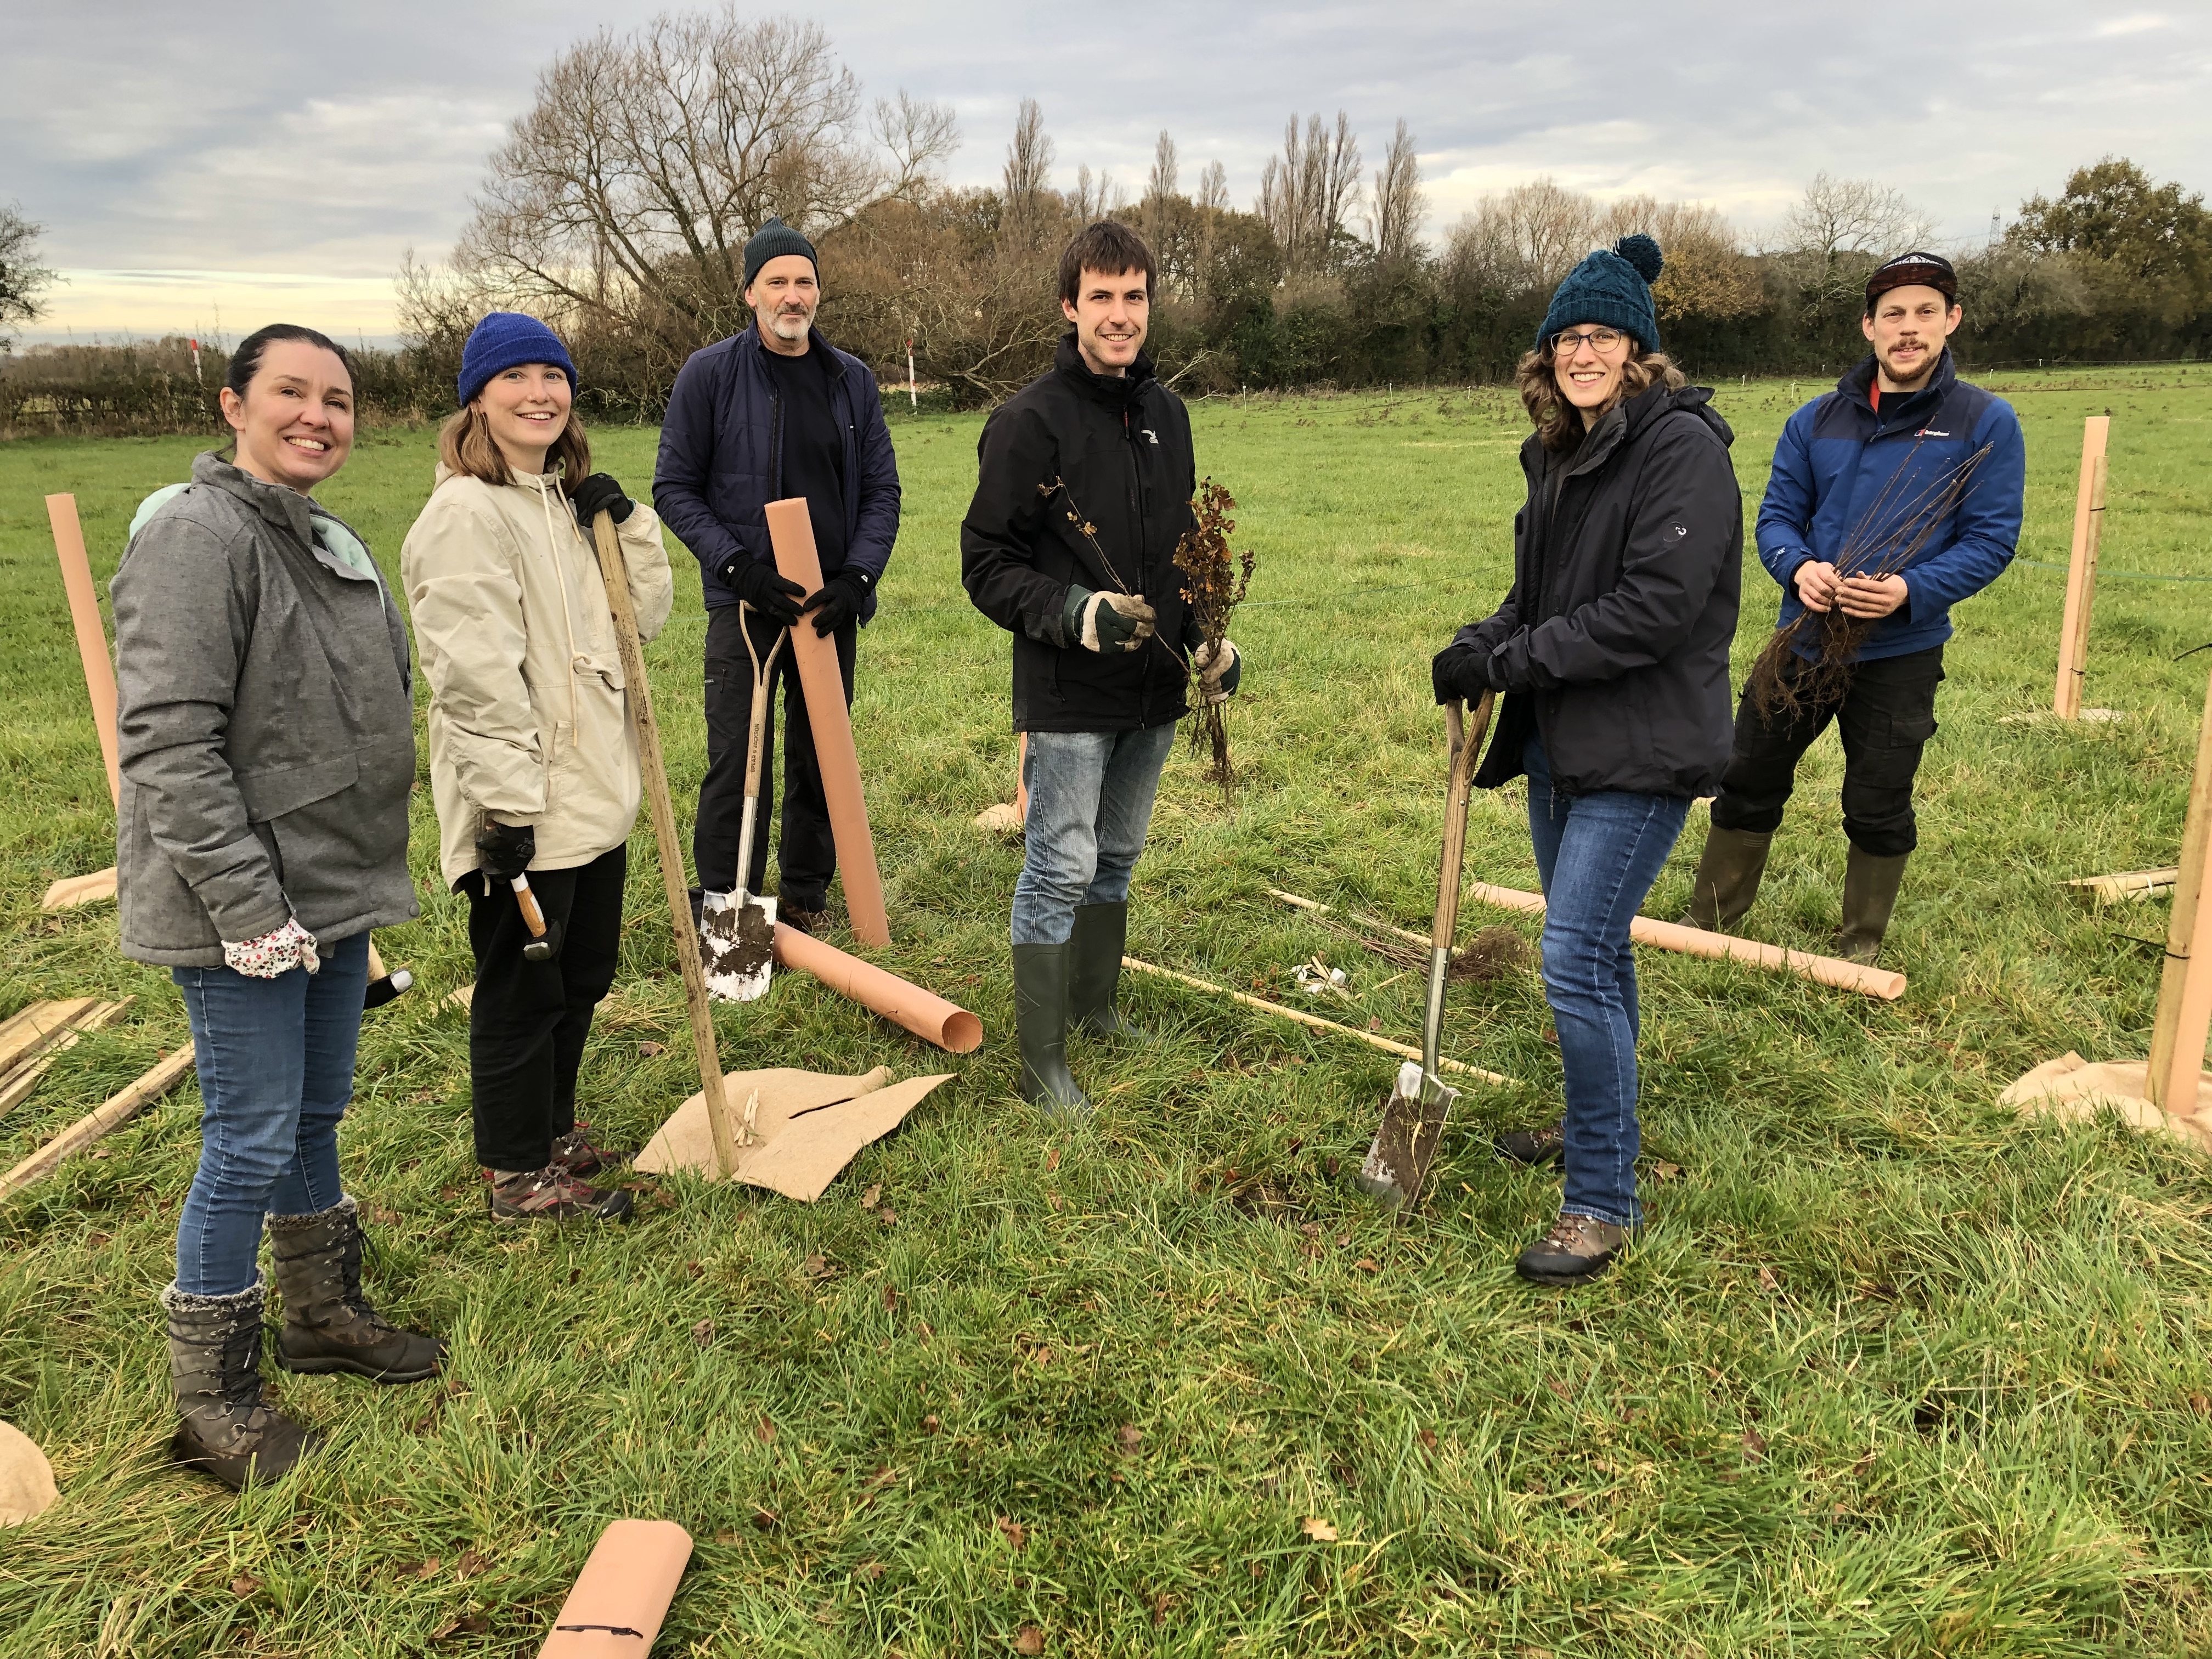 Kelpi on Twitter: "Now that was a fantastic team day. Eight of the team from Kelpi were amongst 20 volunteers planting 500 trees at the start of a new carbon-offsetting forest near